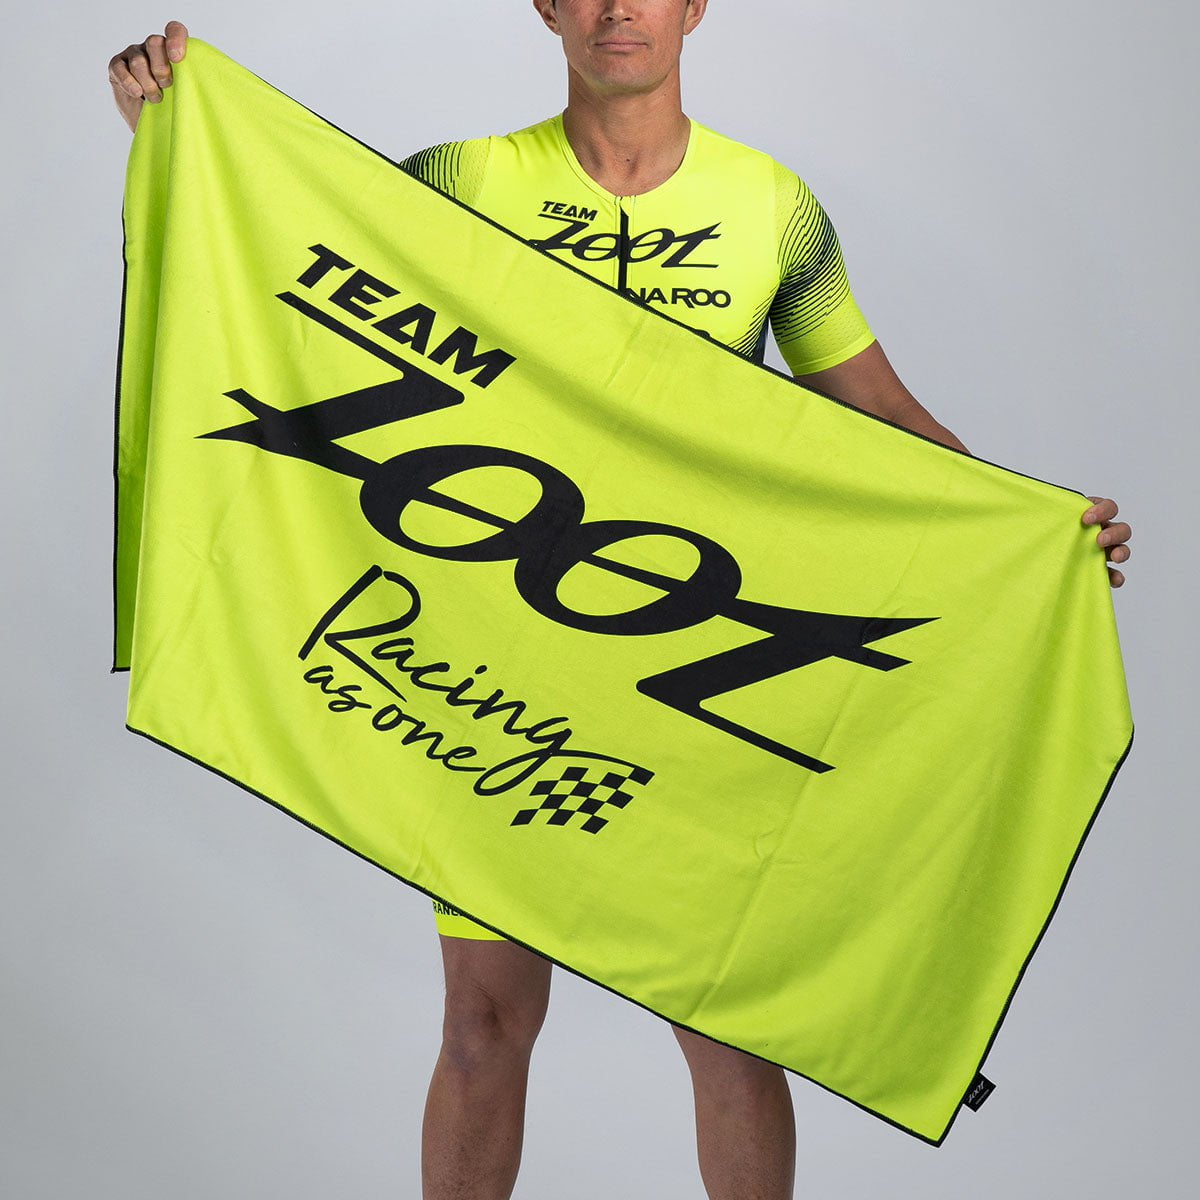 Team Zoot TOWELS Team Zoot Transition Towel - Neon Yellow